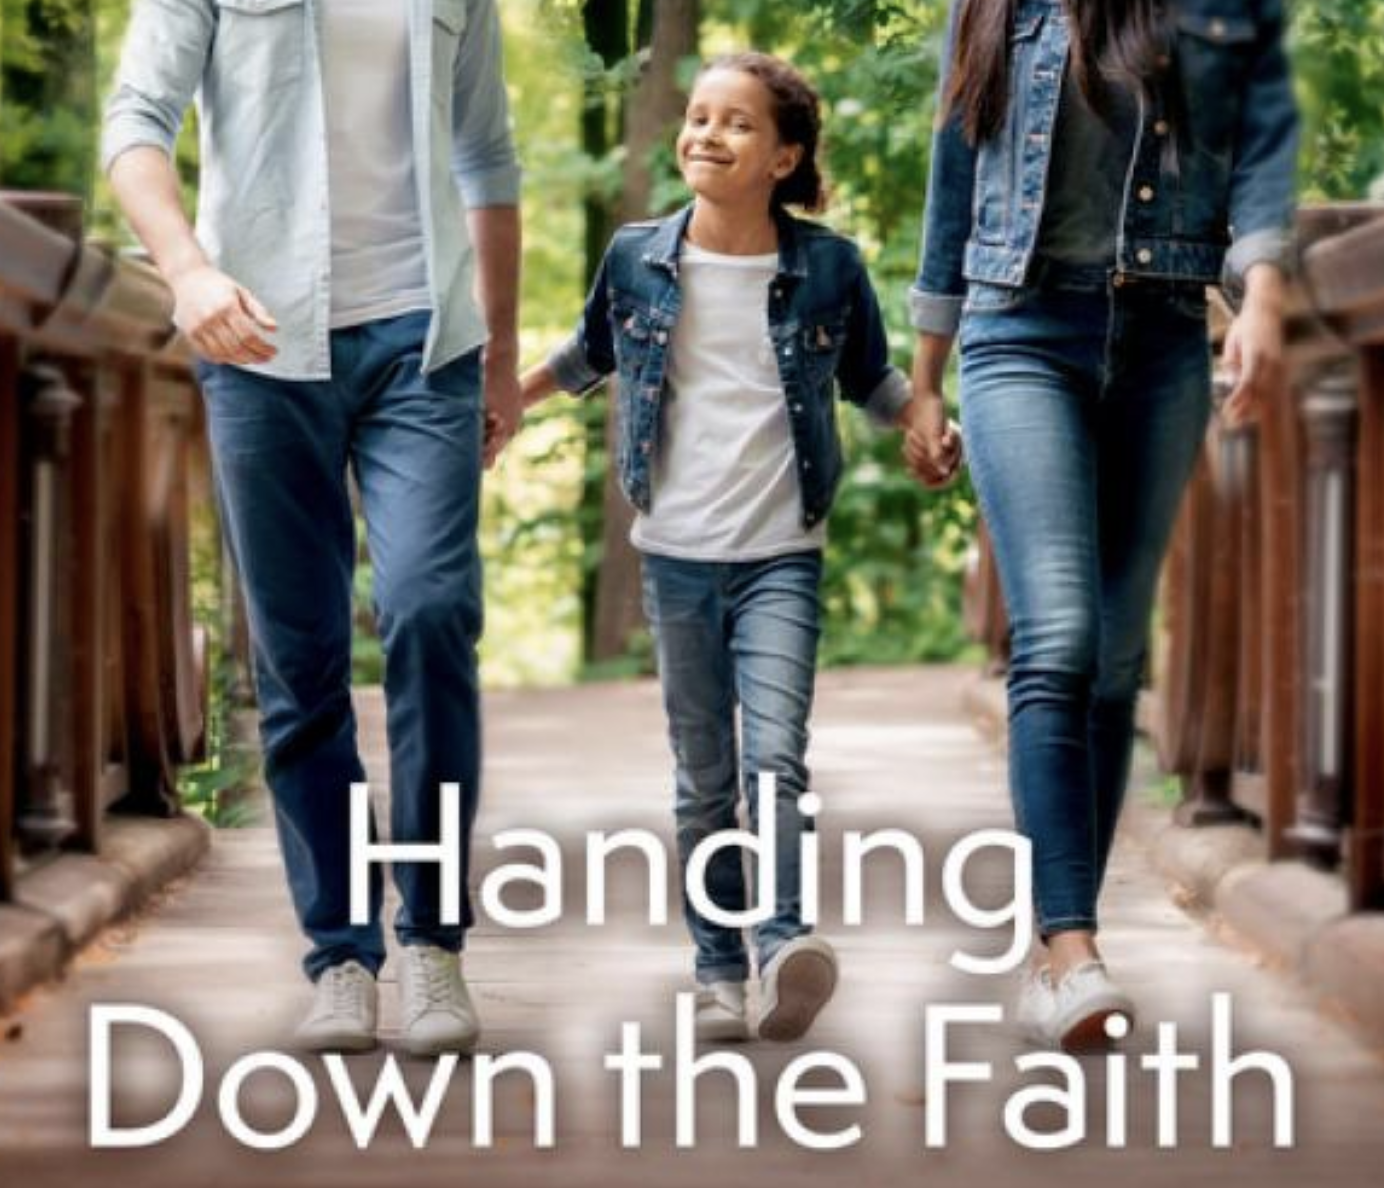 111 THE PARENTS (what does sociology tell us about whether kids carry on with the faith of parents?)